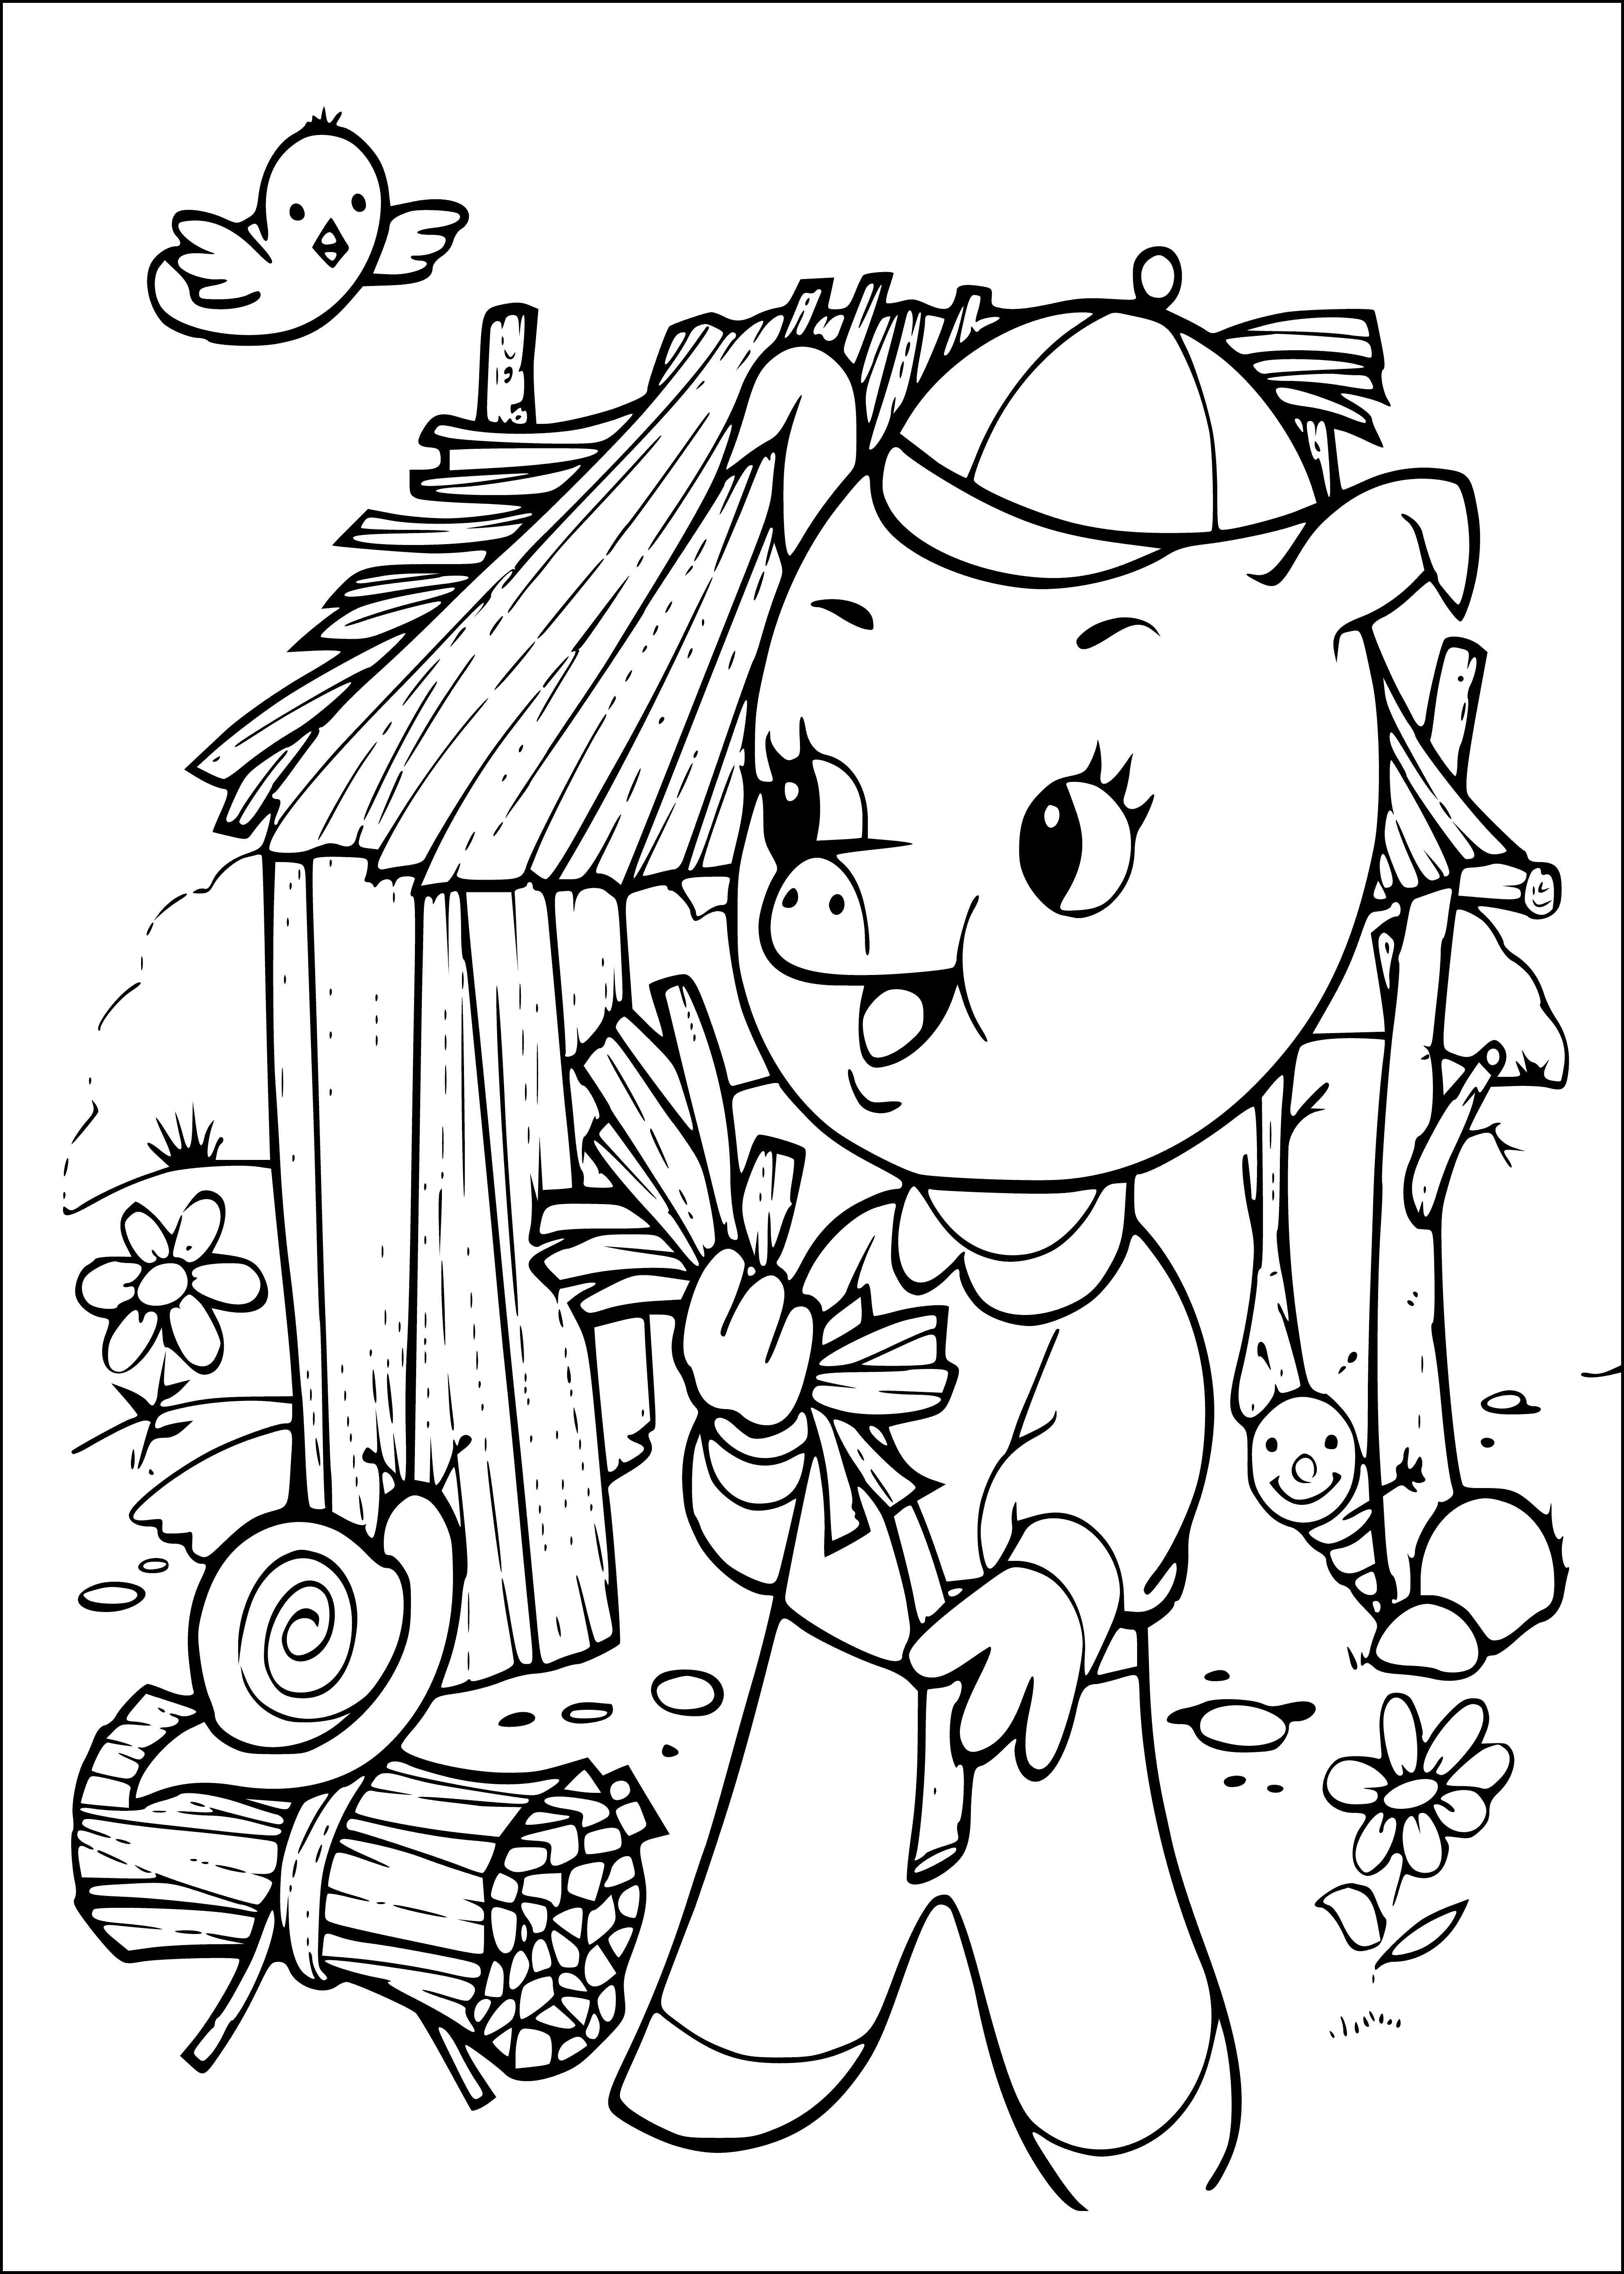 House of branches coloring page